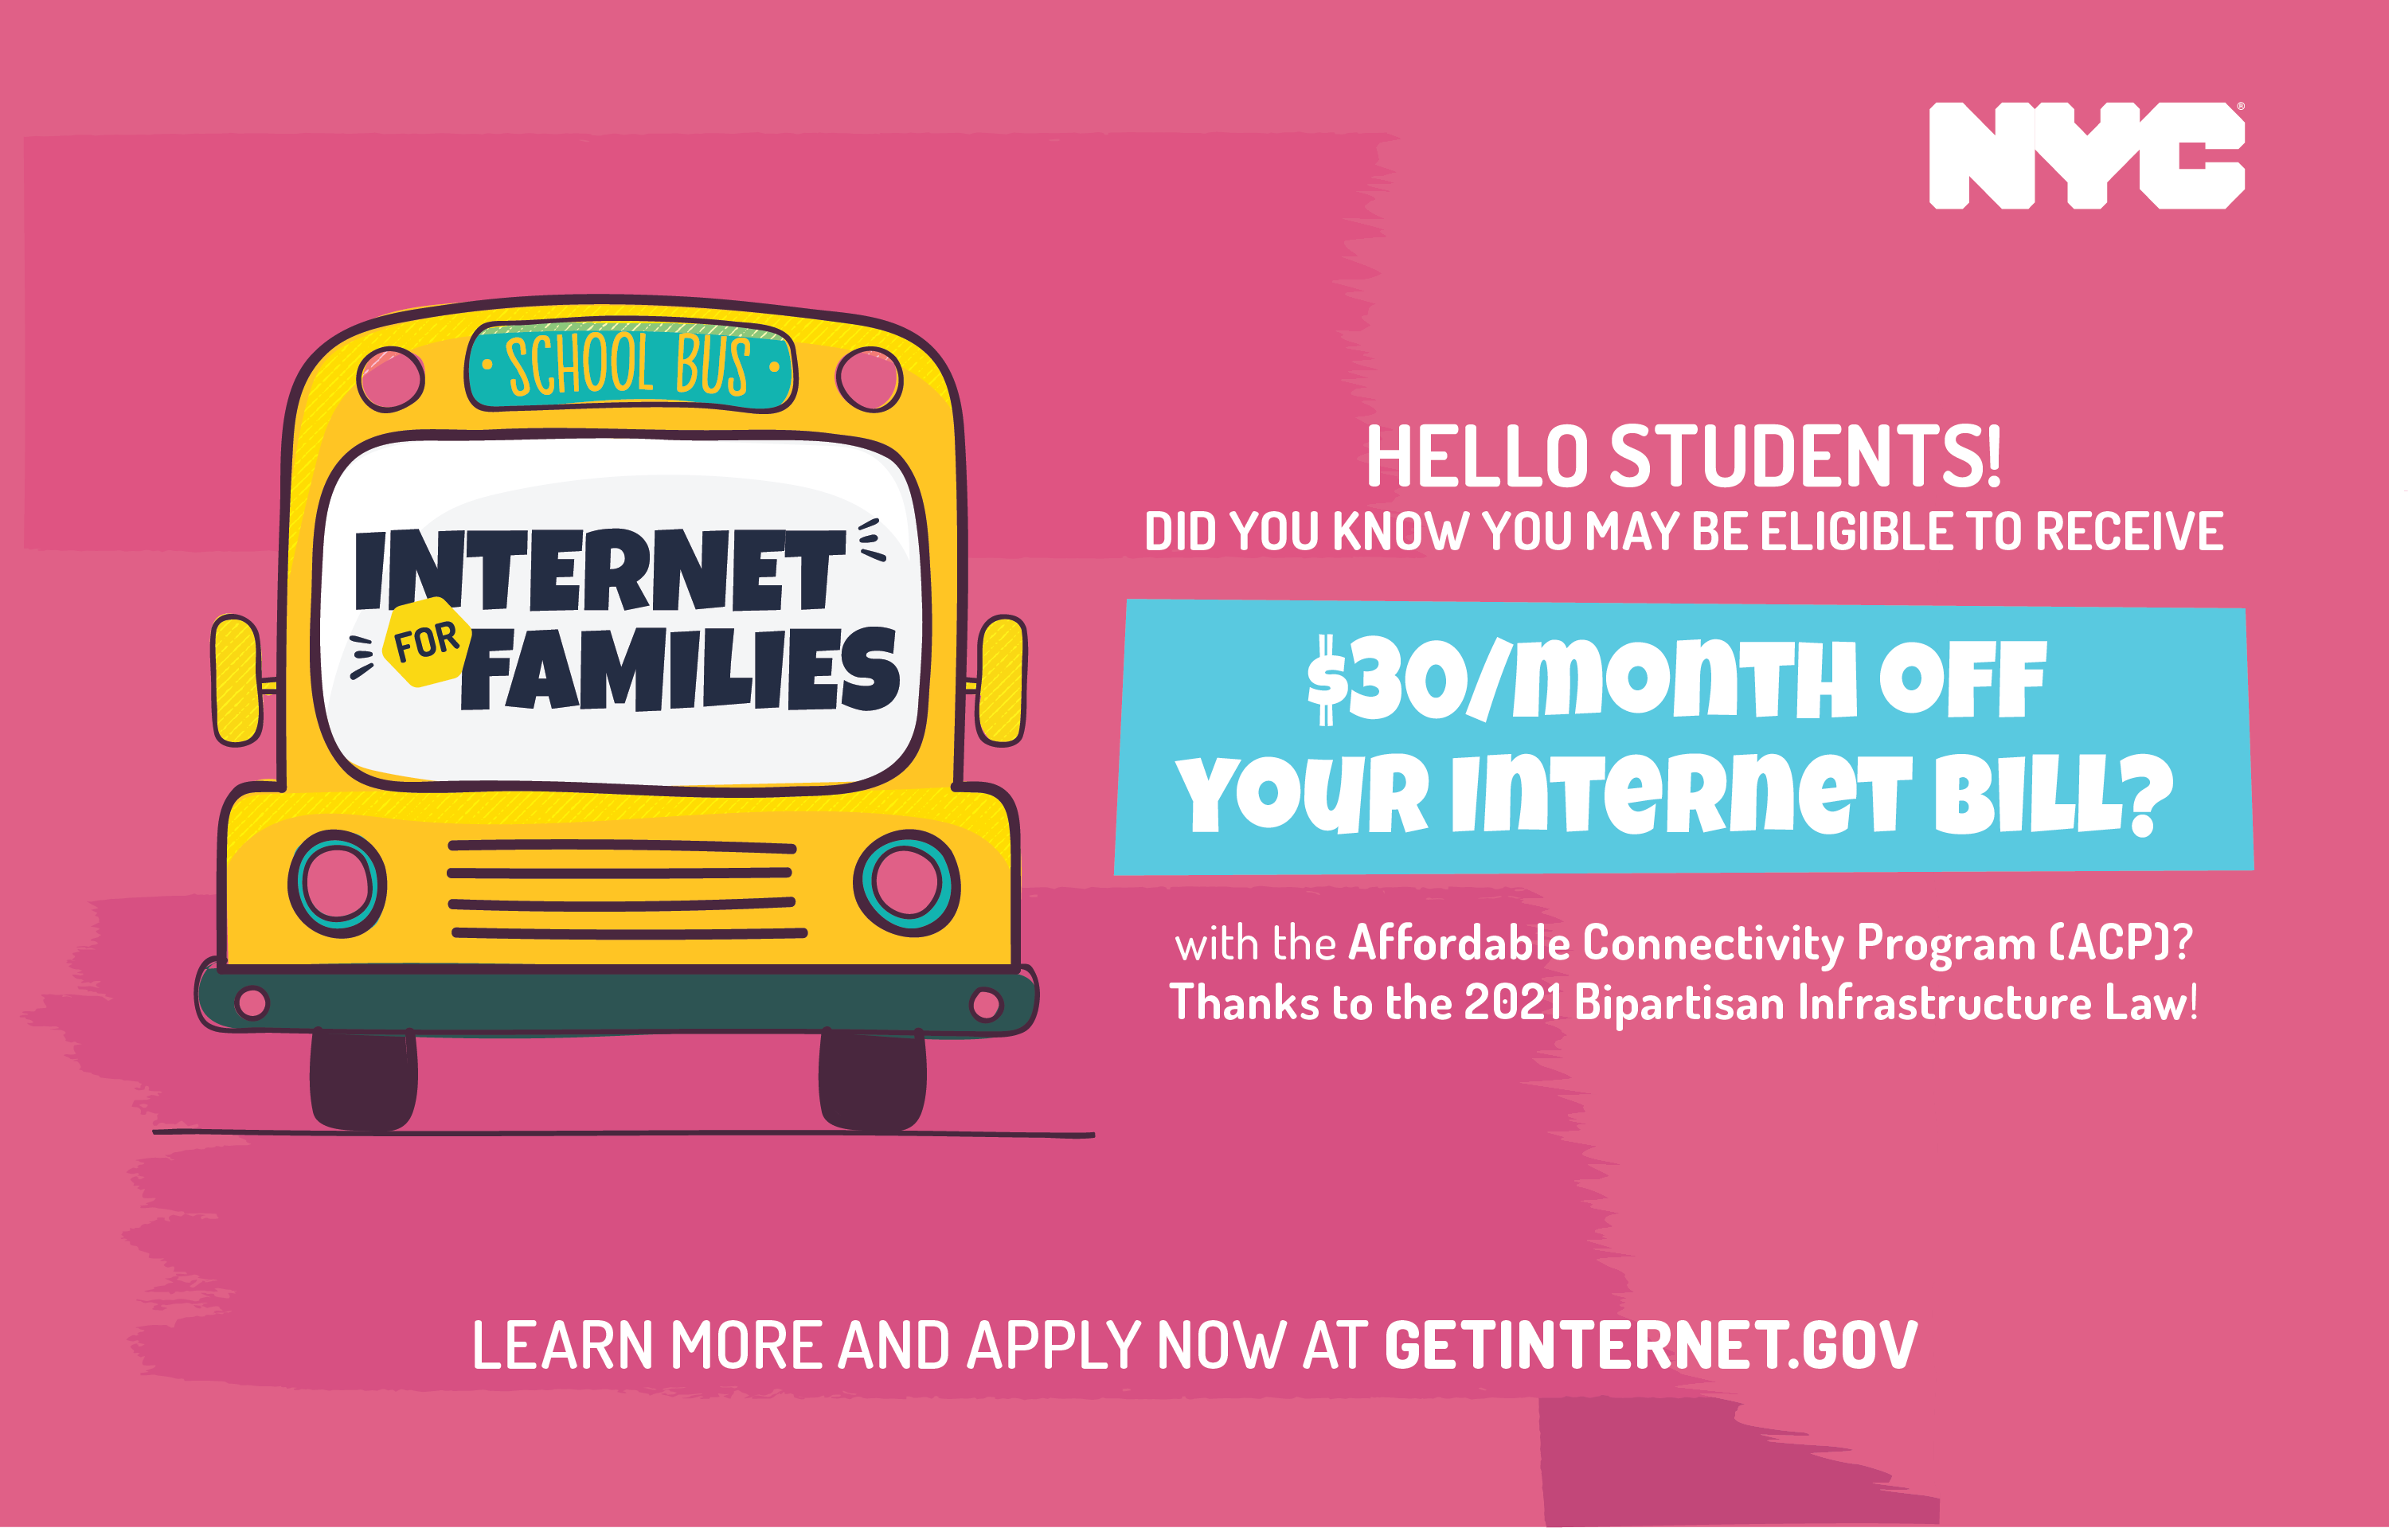 Hello students! You may be eligible to receive $30/month off your internet bill
                                           